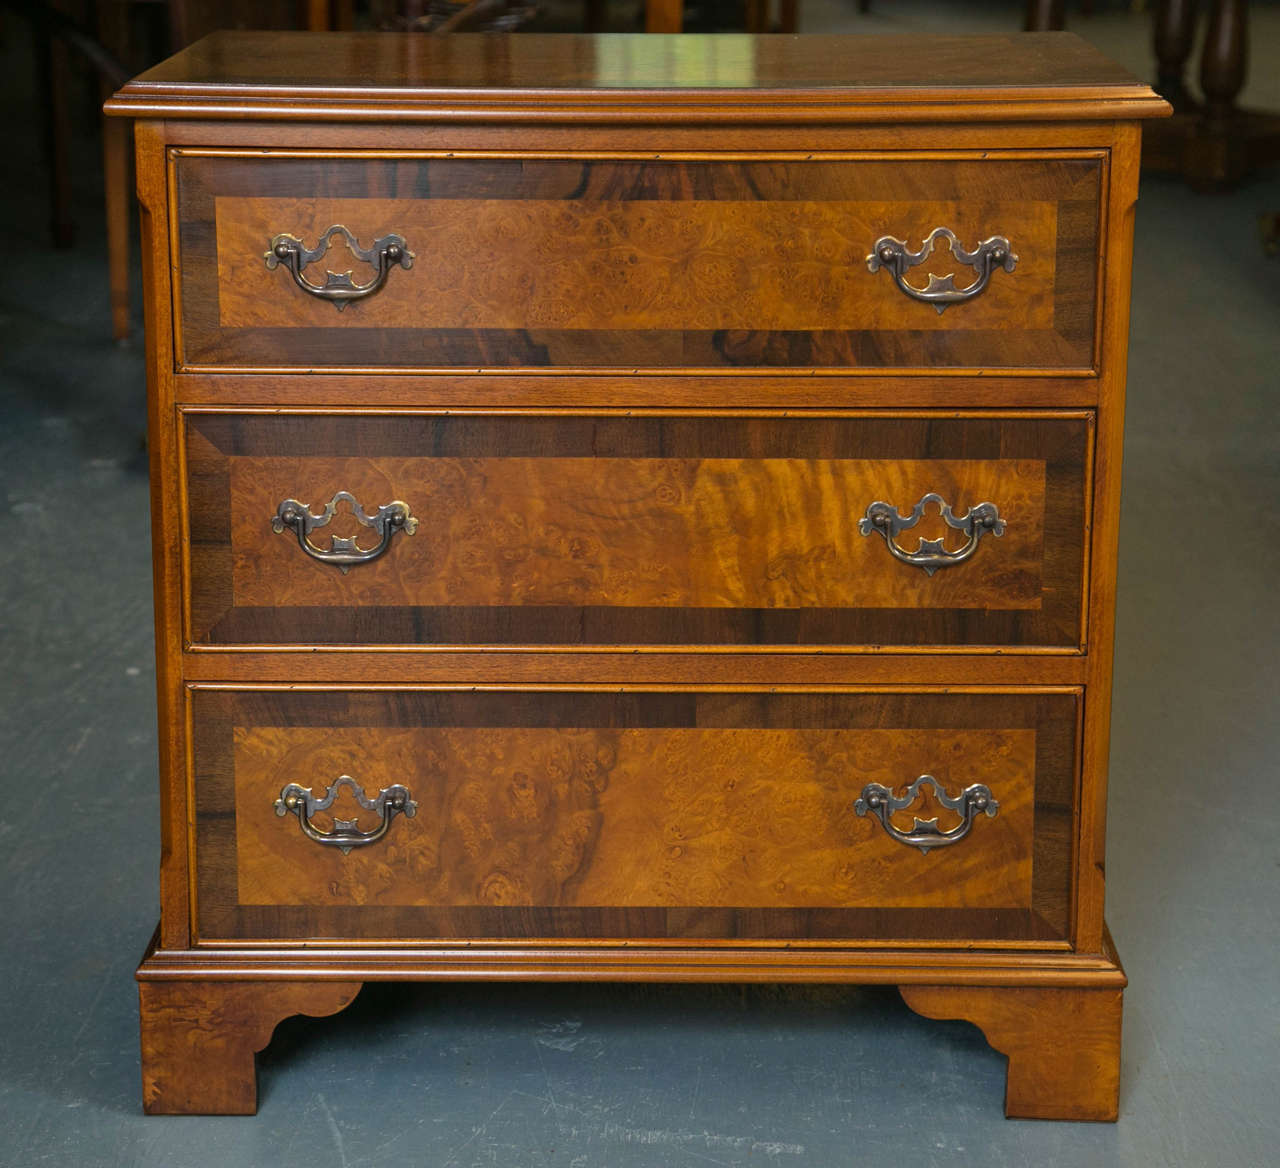 Custom made for us by English cabinet makers, this Classic little three-drawer chest in walnut burl has chamfered corners and rests on bracket feet. The top and drawer fronts are crossbanded in a contrasting straight grain walnut that reins in the